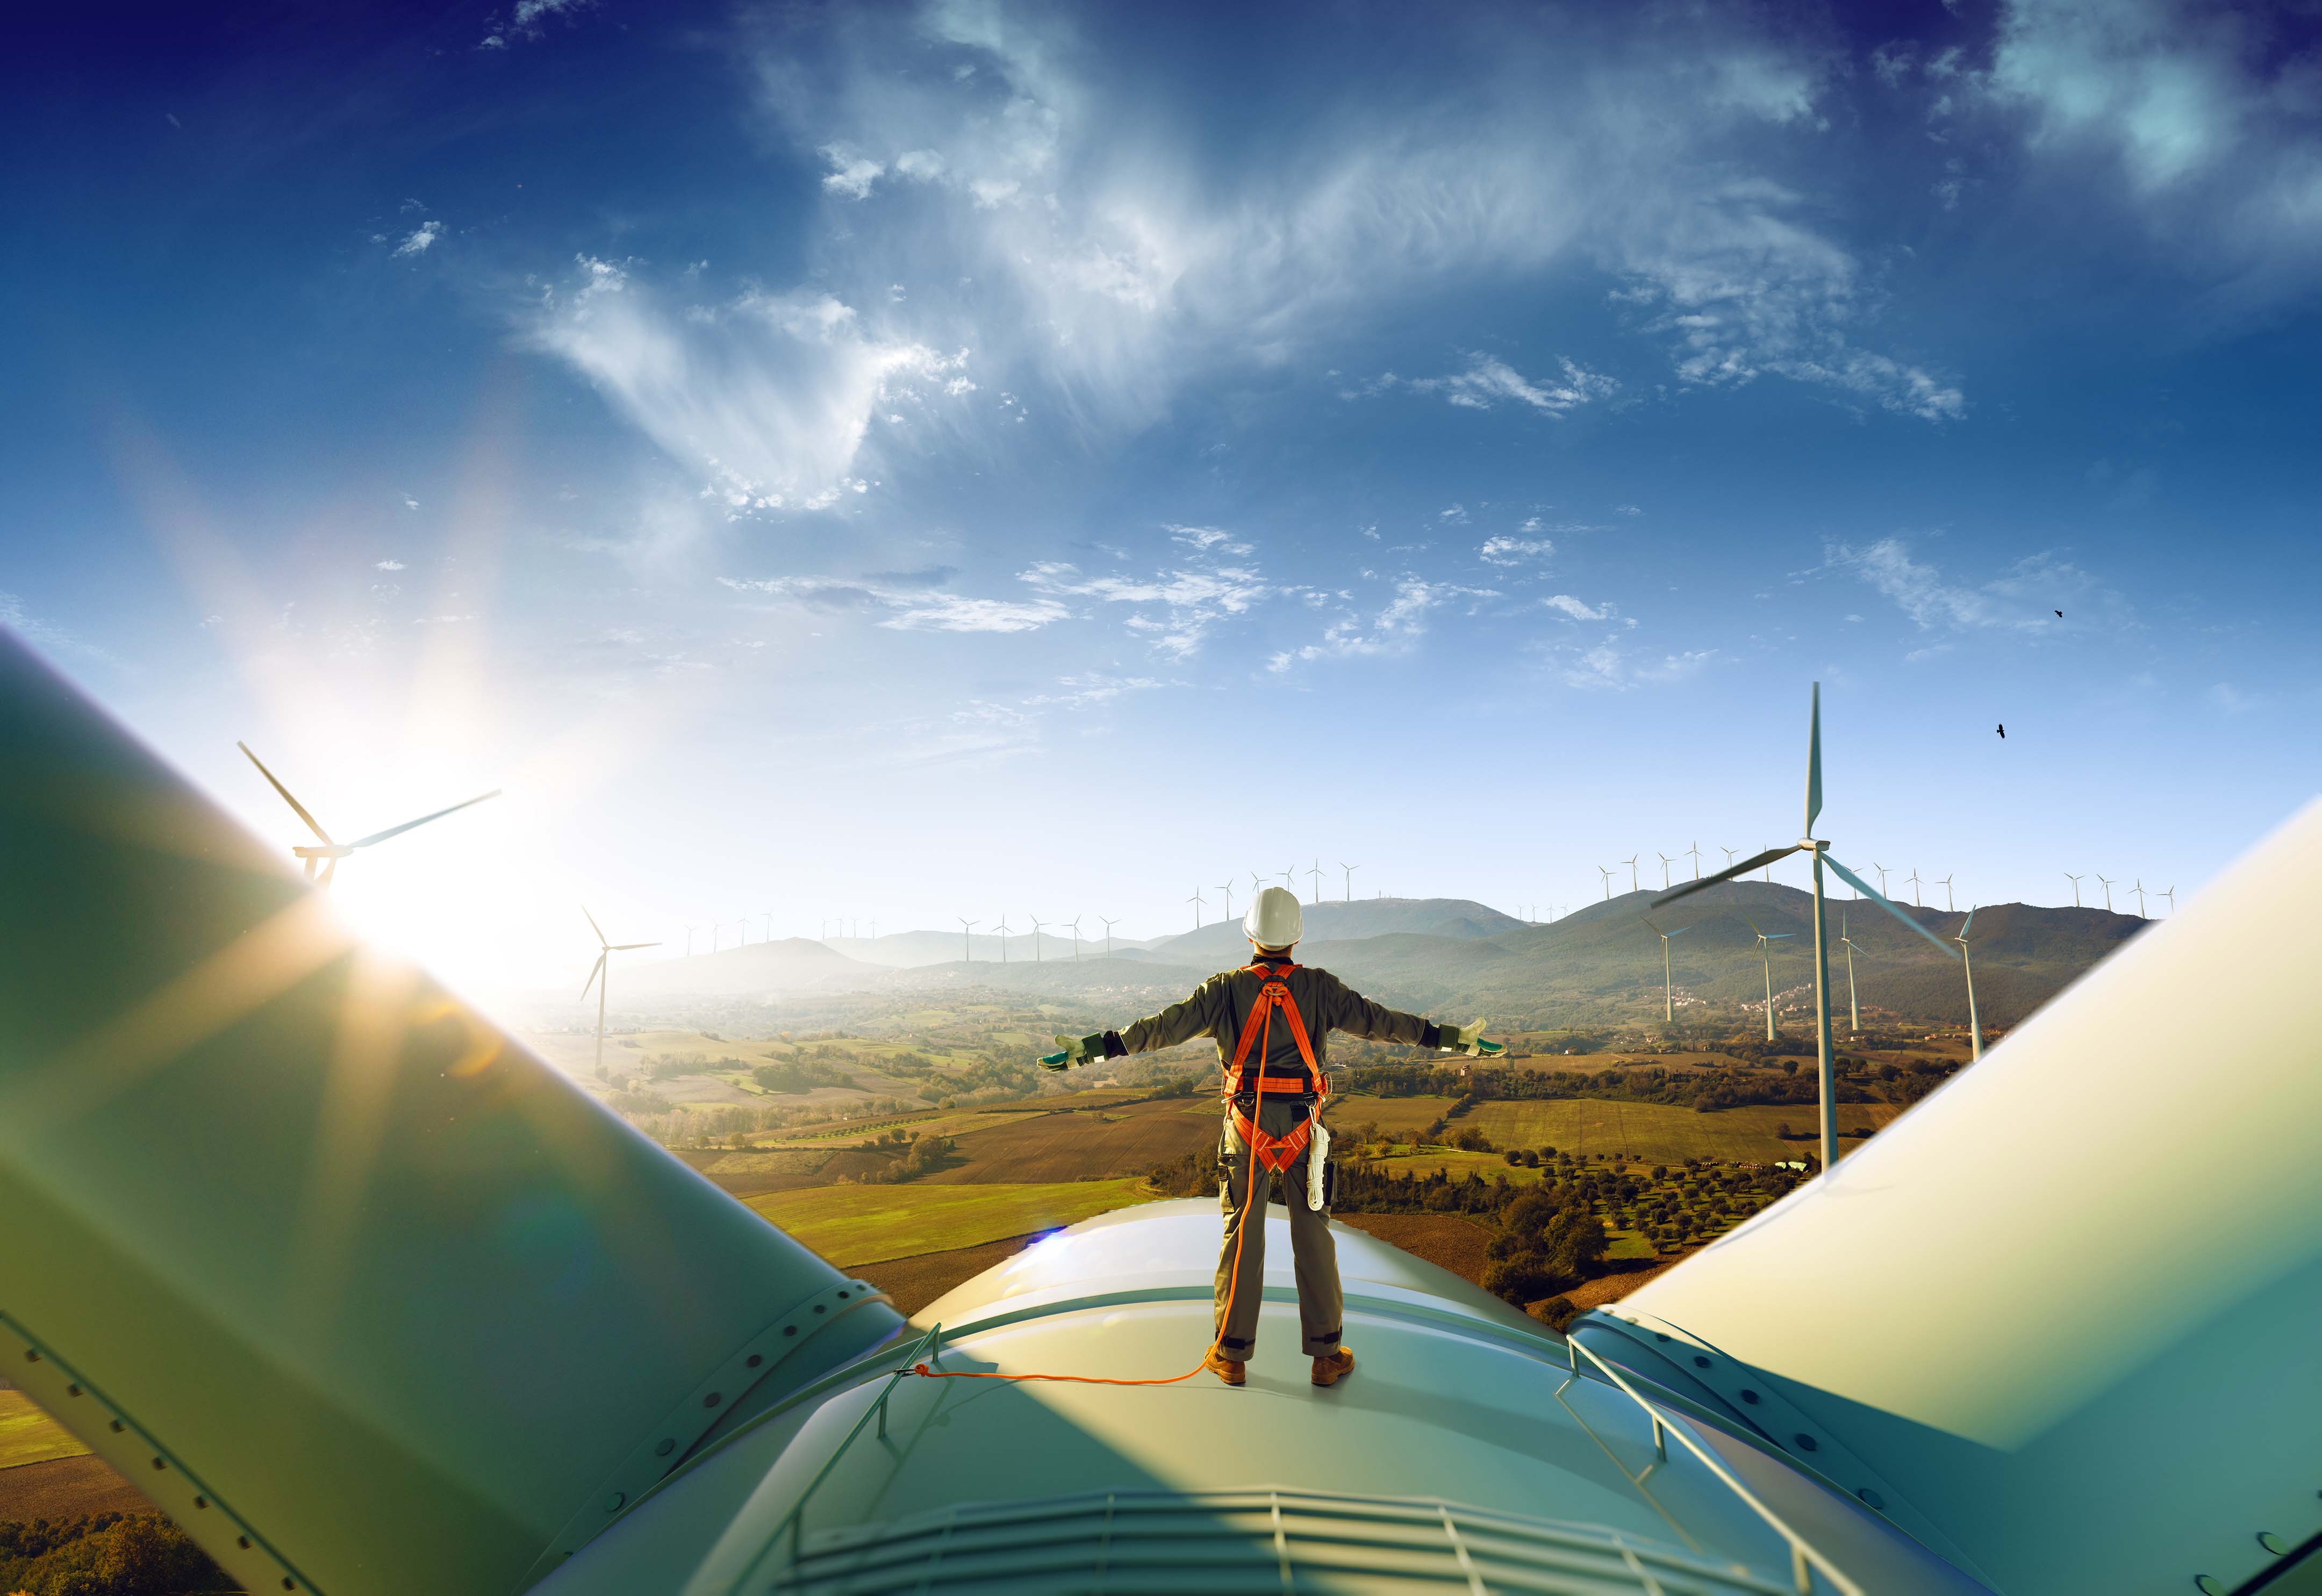 Image: Worker standing on wind turbine looking at landscape with wind farm